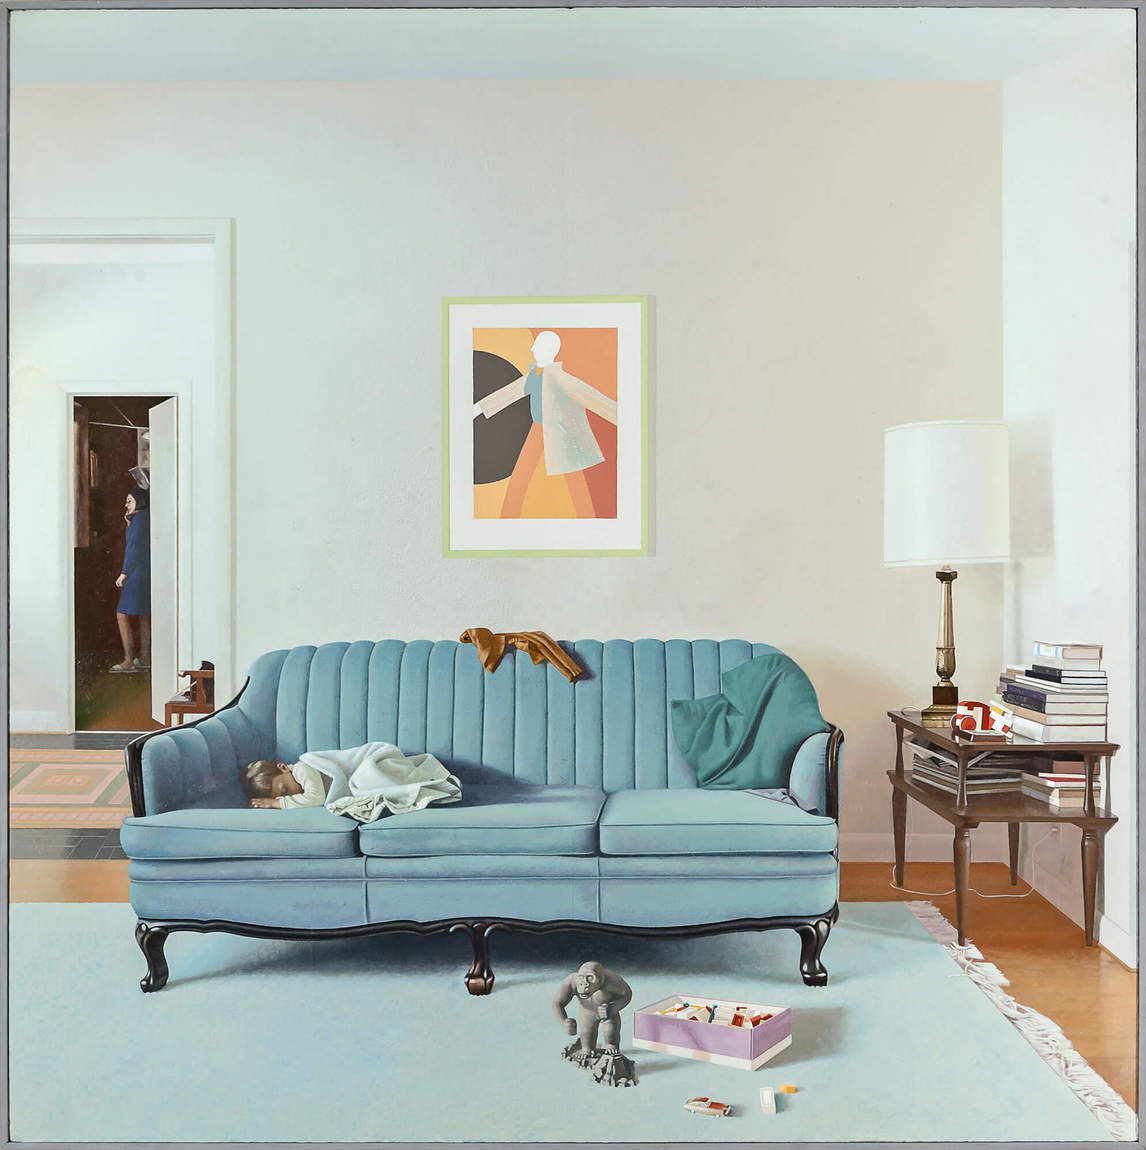 Art Canada Institute, Jack Chambers, Diego Sleeping No. 2, 1971, oil on wood, 121.9 x 121.9 cm, collection of TD Bank Group.